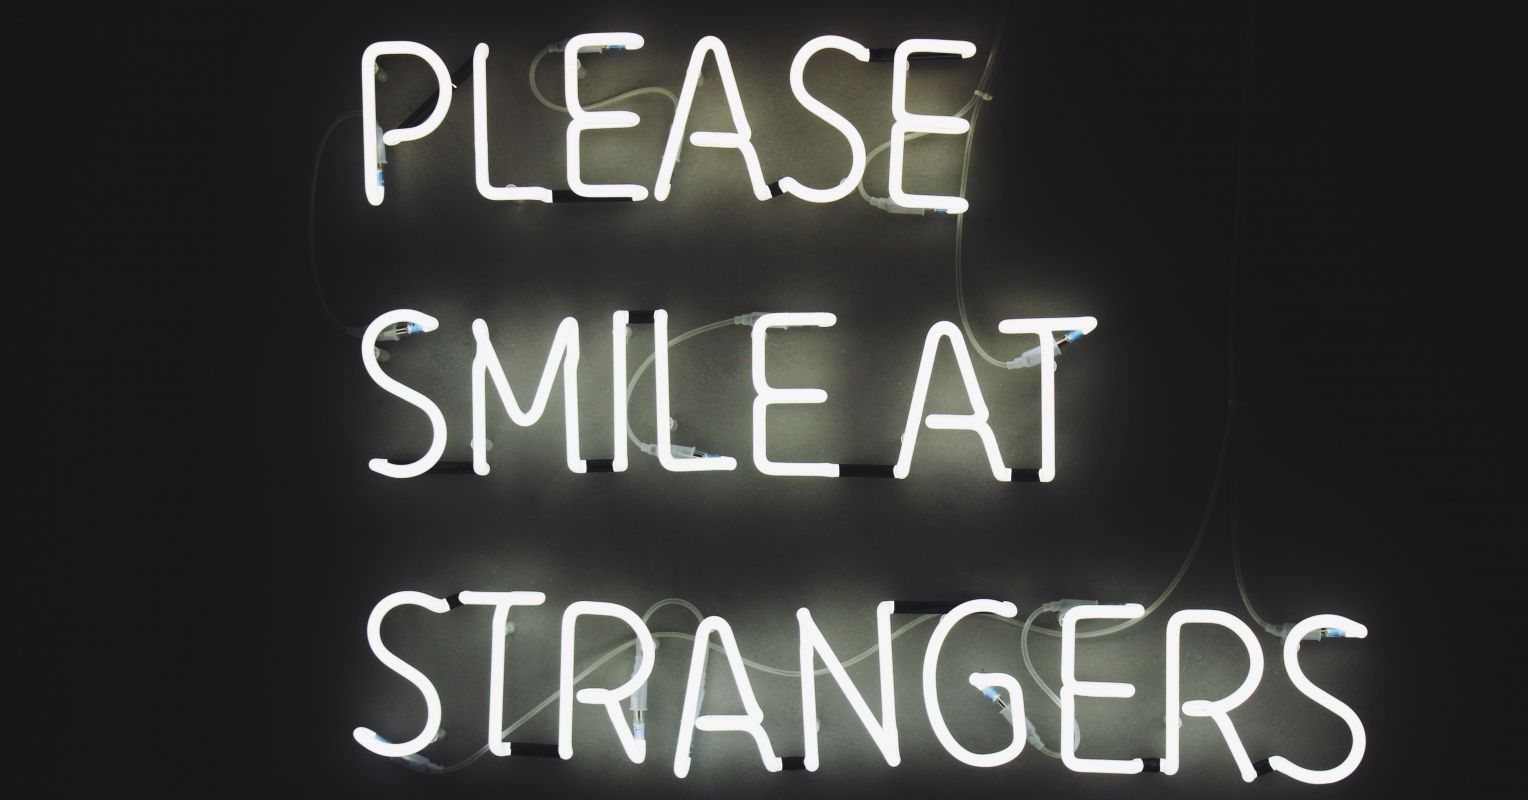 Why You Should Talk to Strangers